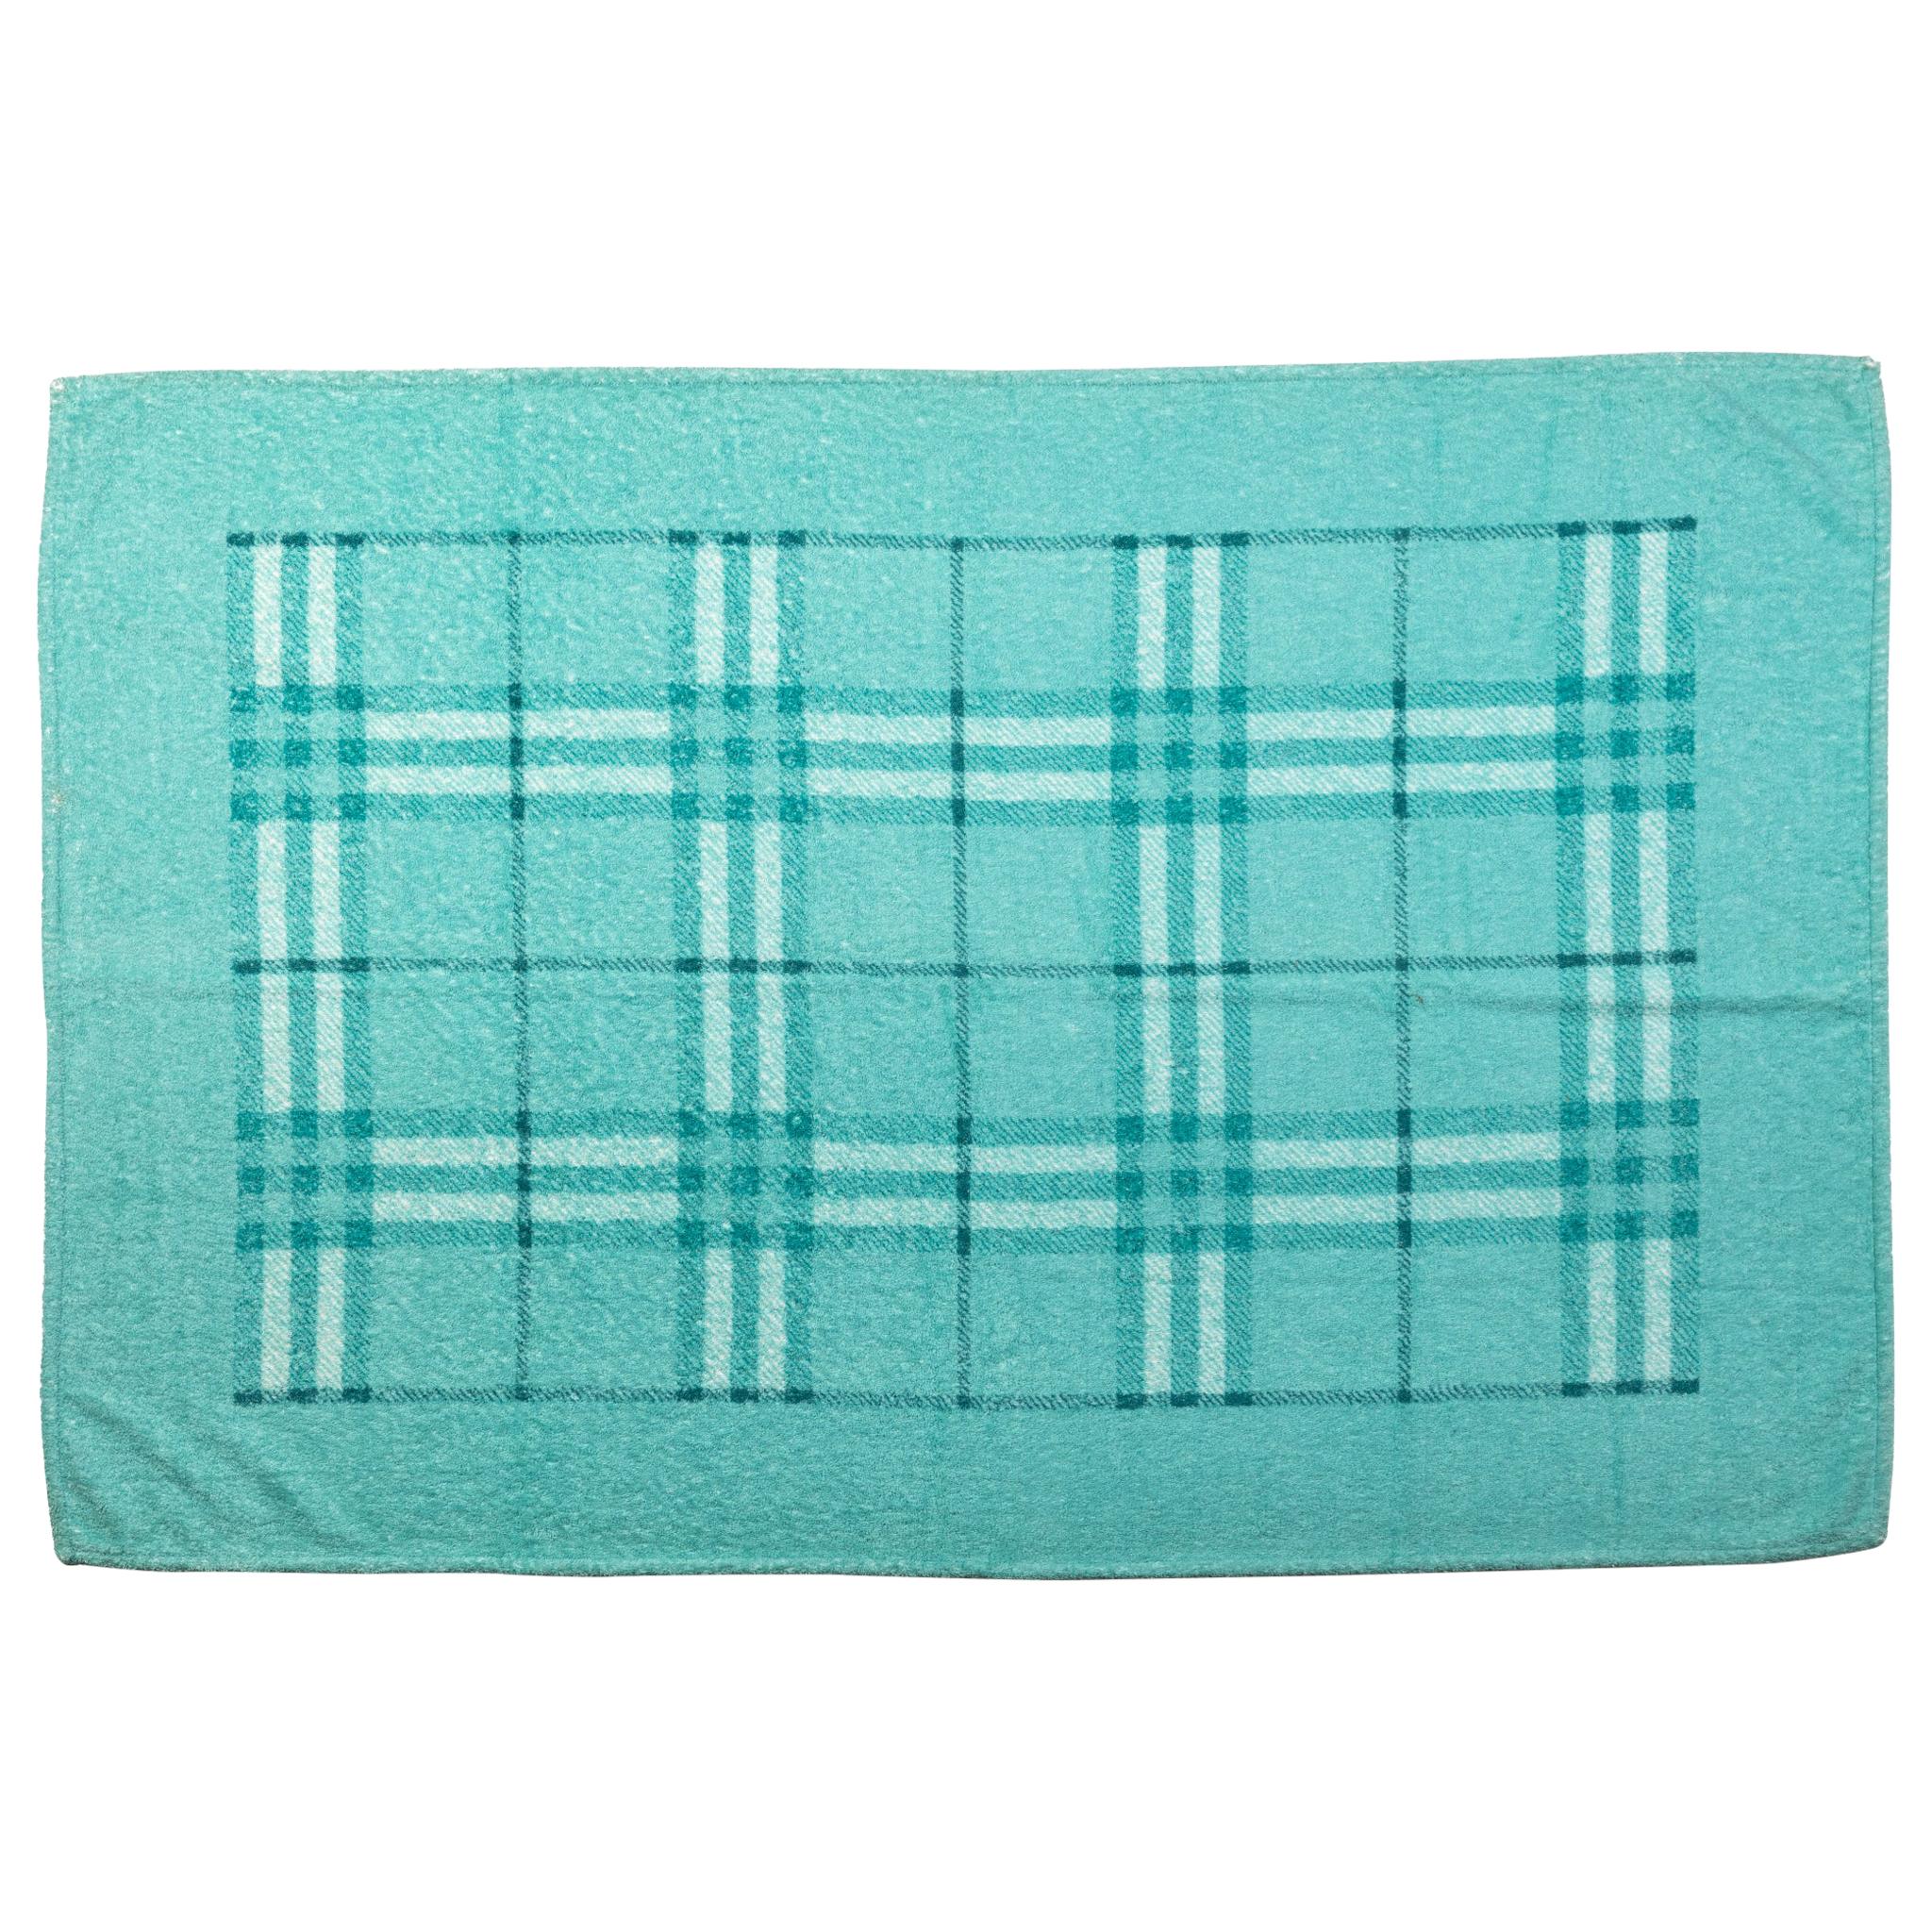 New Burberry New Turquoise Cotton Towel